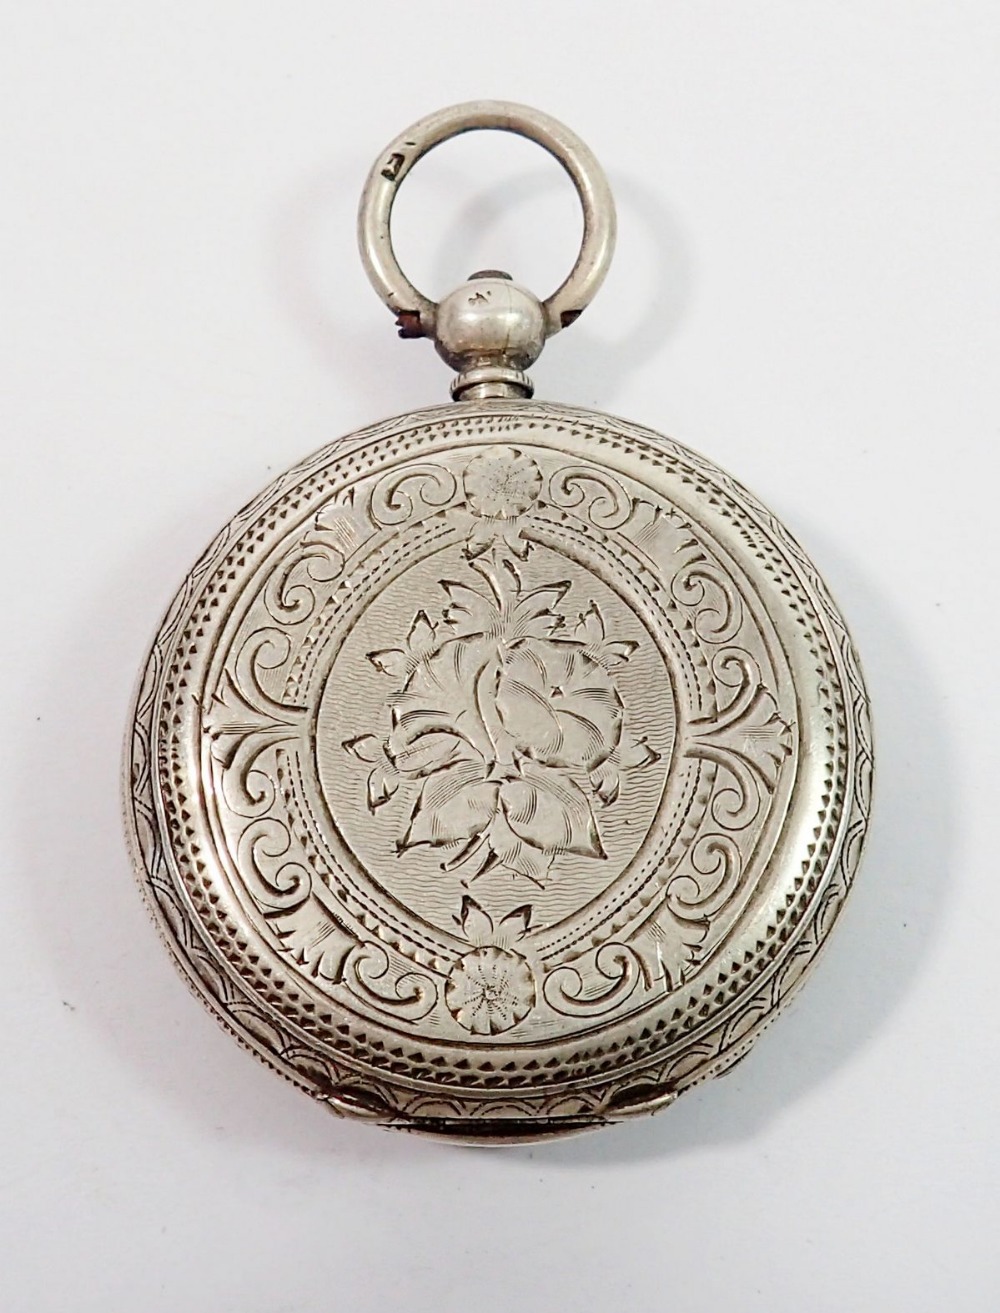 A silver Victorian fob watch with enamel dial - Image 2 of 2